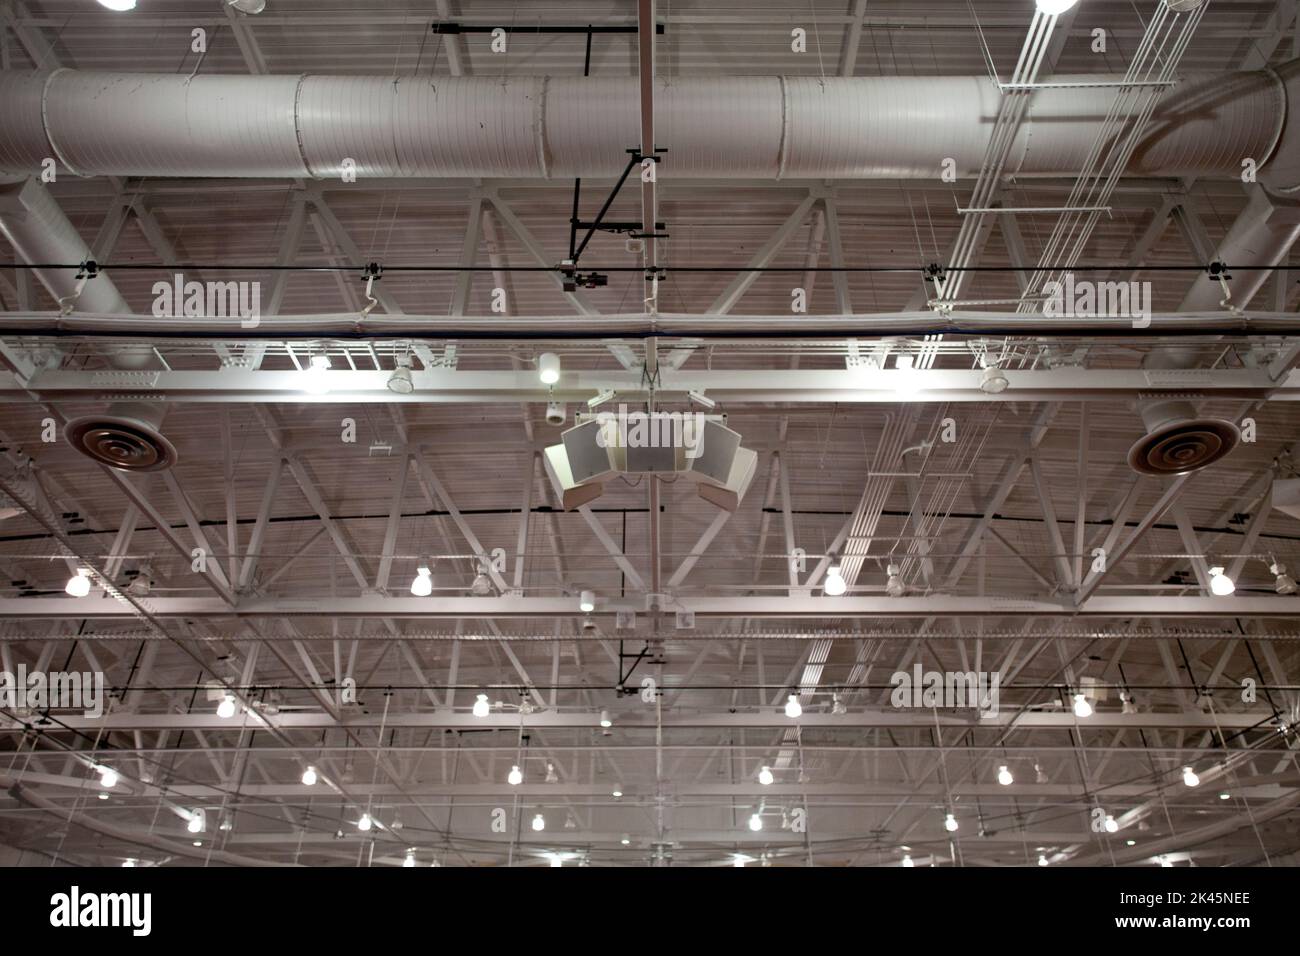 The ceiling of a large building, with air ducts and pipes, the rafters, gantry and struts, sound system speakers, lights and extractor units. Stock Photo